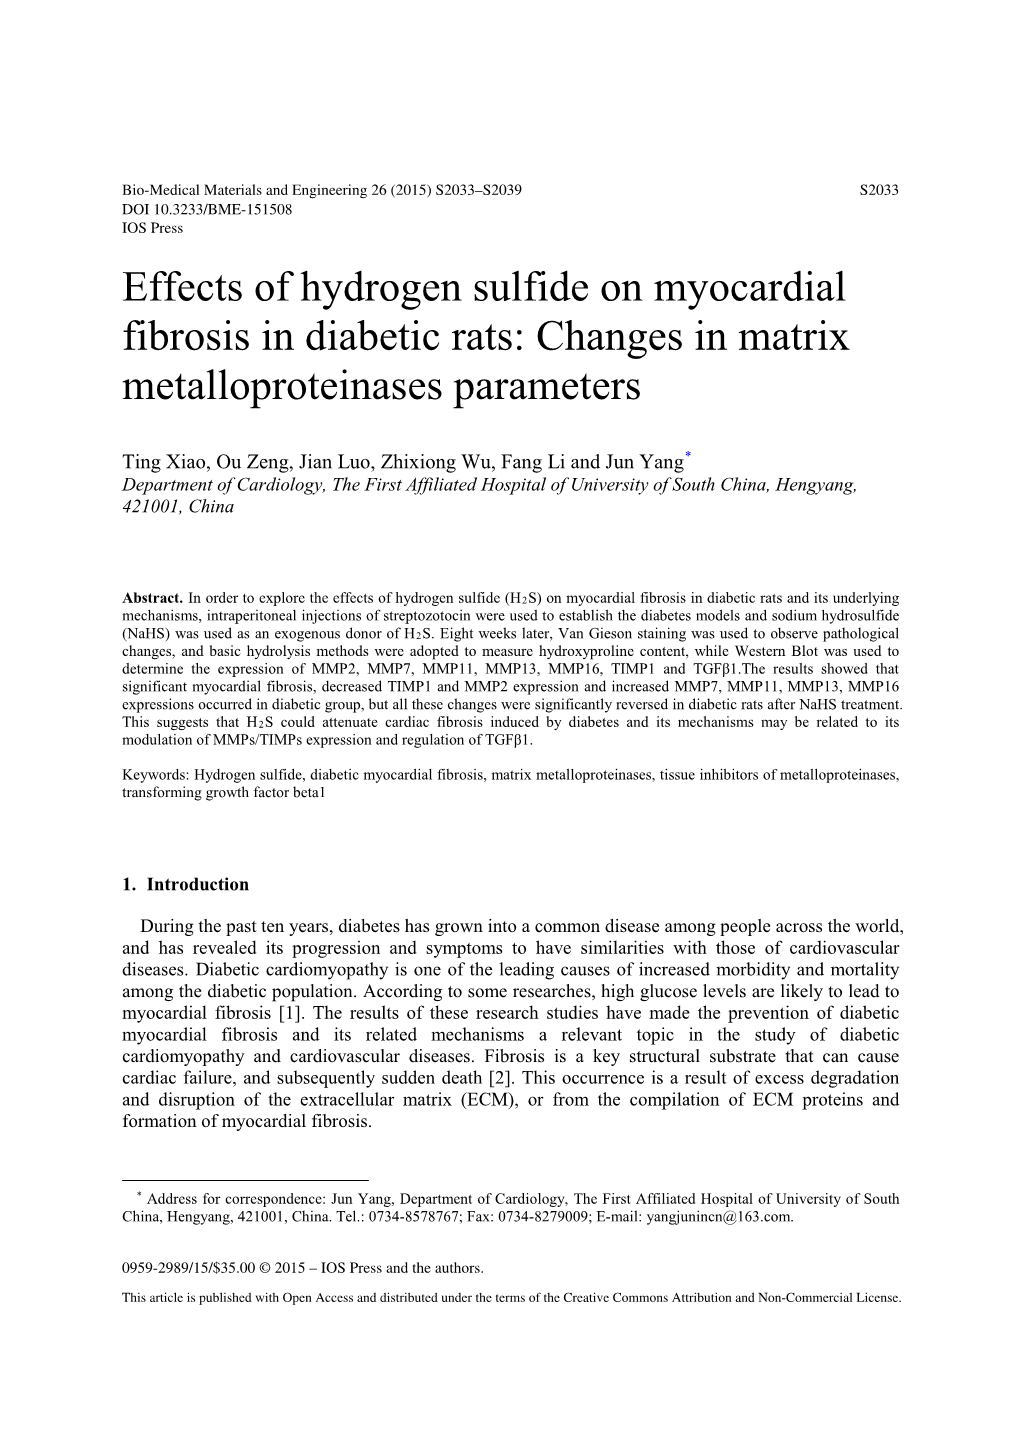 Effects of Hydrogen Sulfide on Myocardial Fibrosis in Diabetic Rats: Changes in Matrix Metalloproteinases Parameters